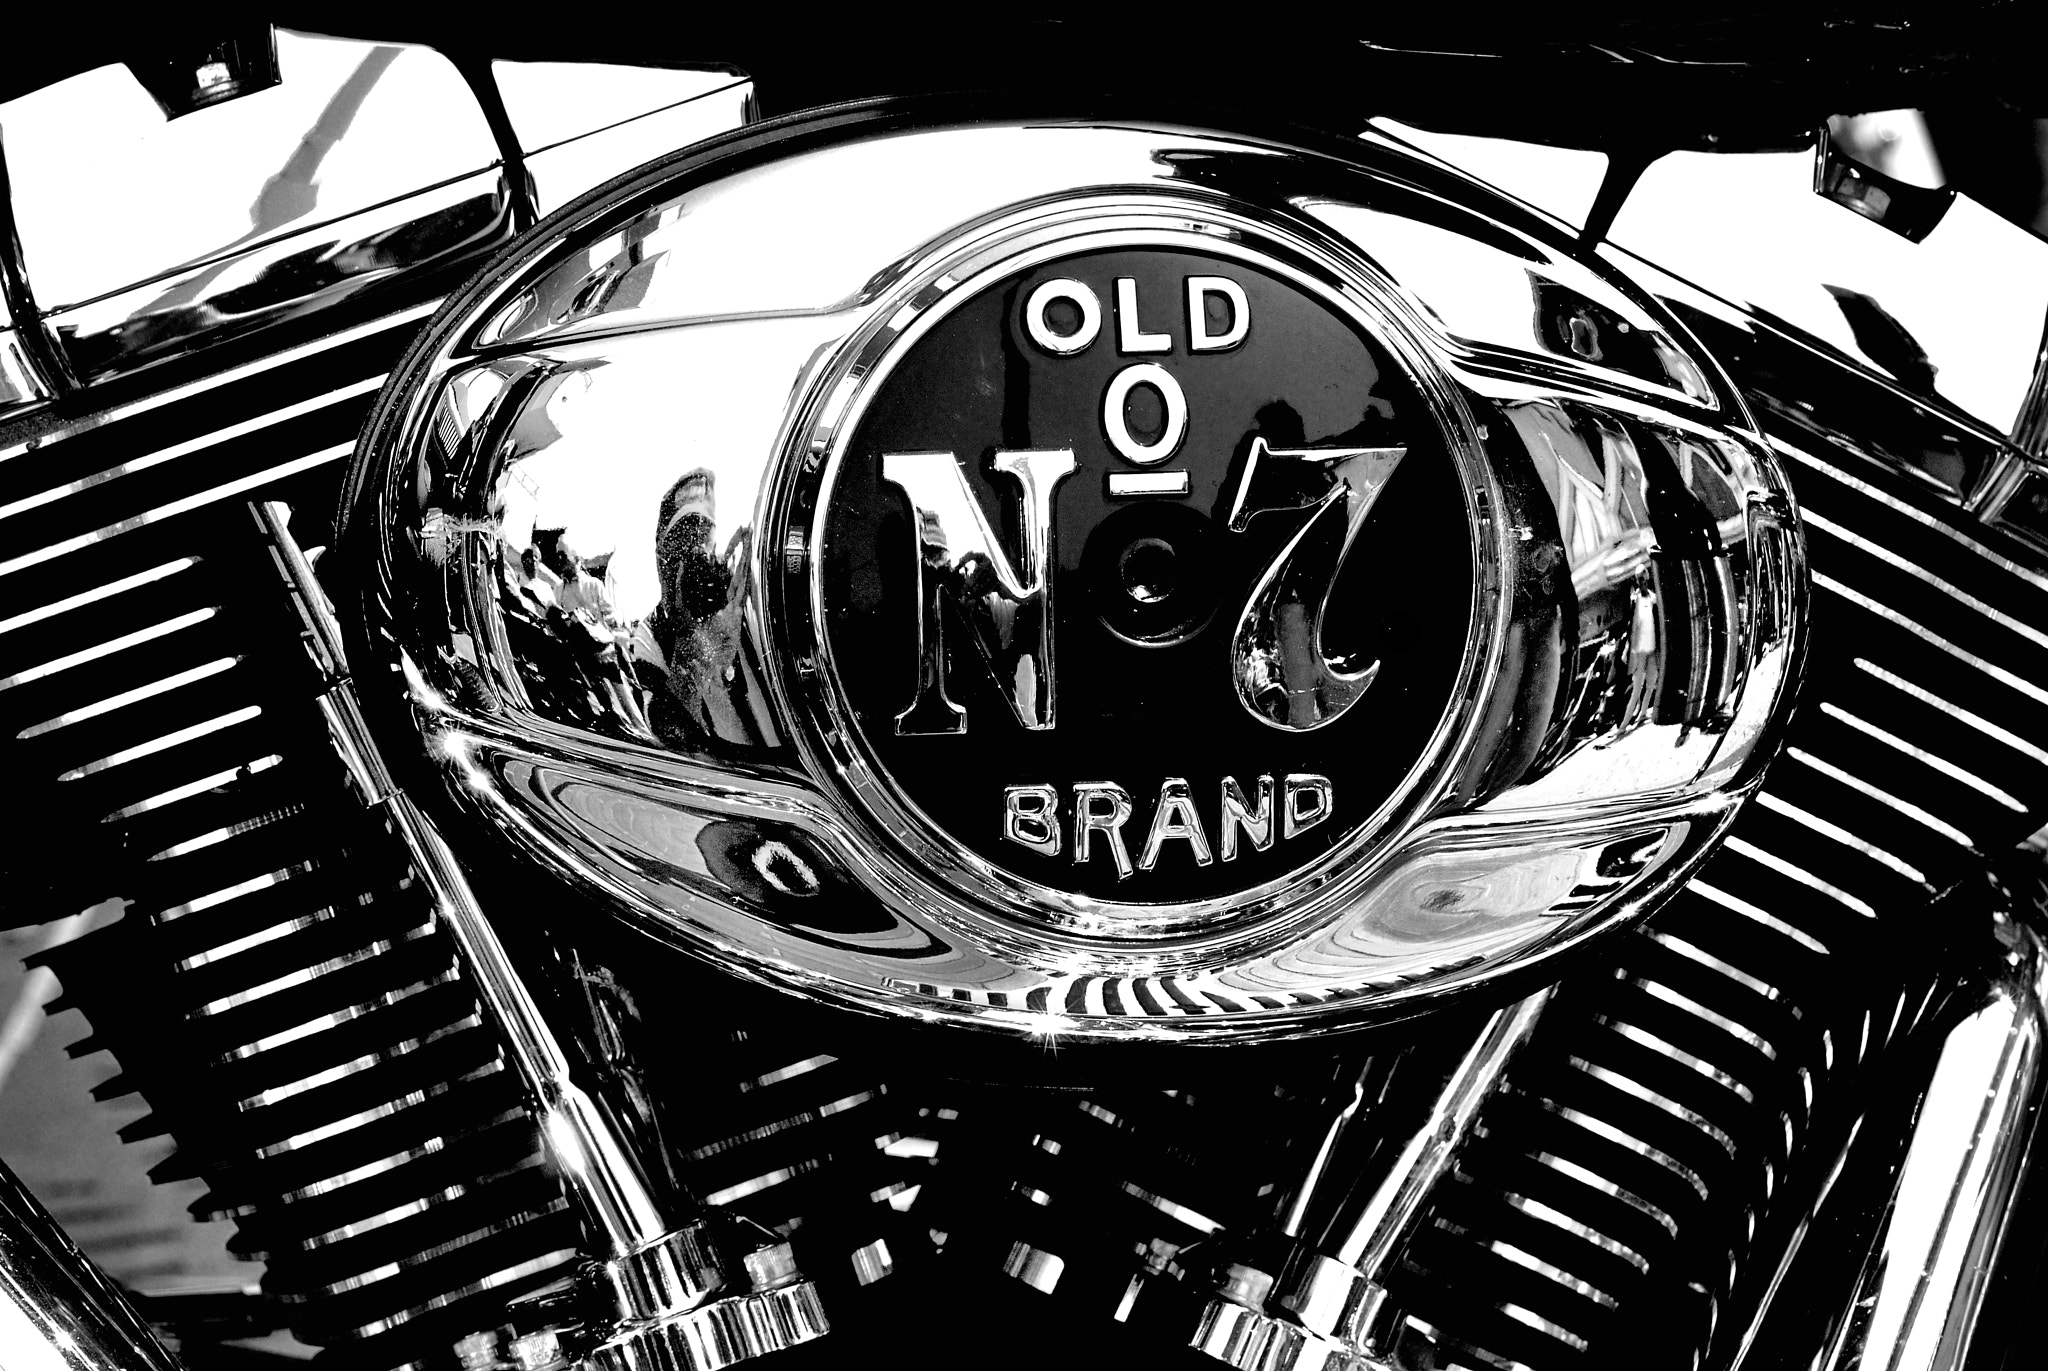 Nikon D200 sample photo. Details of a harley   b&w photography